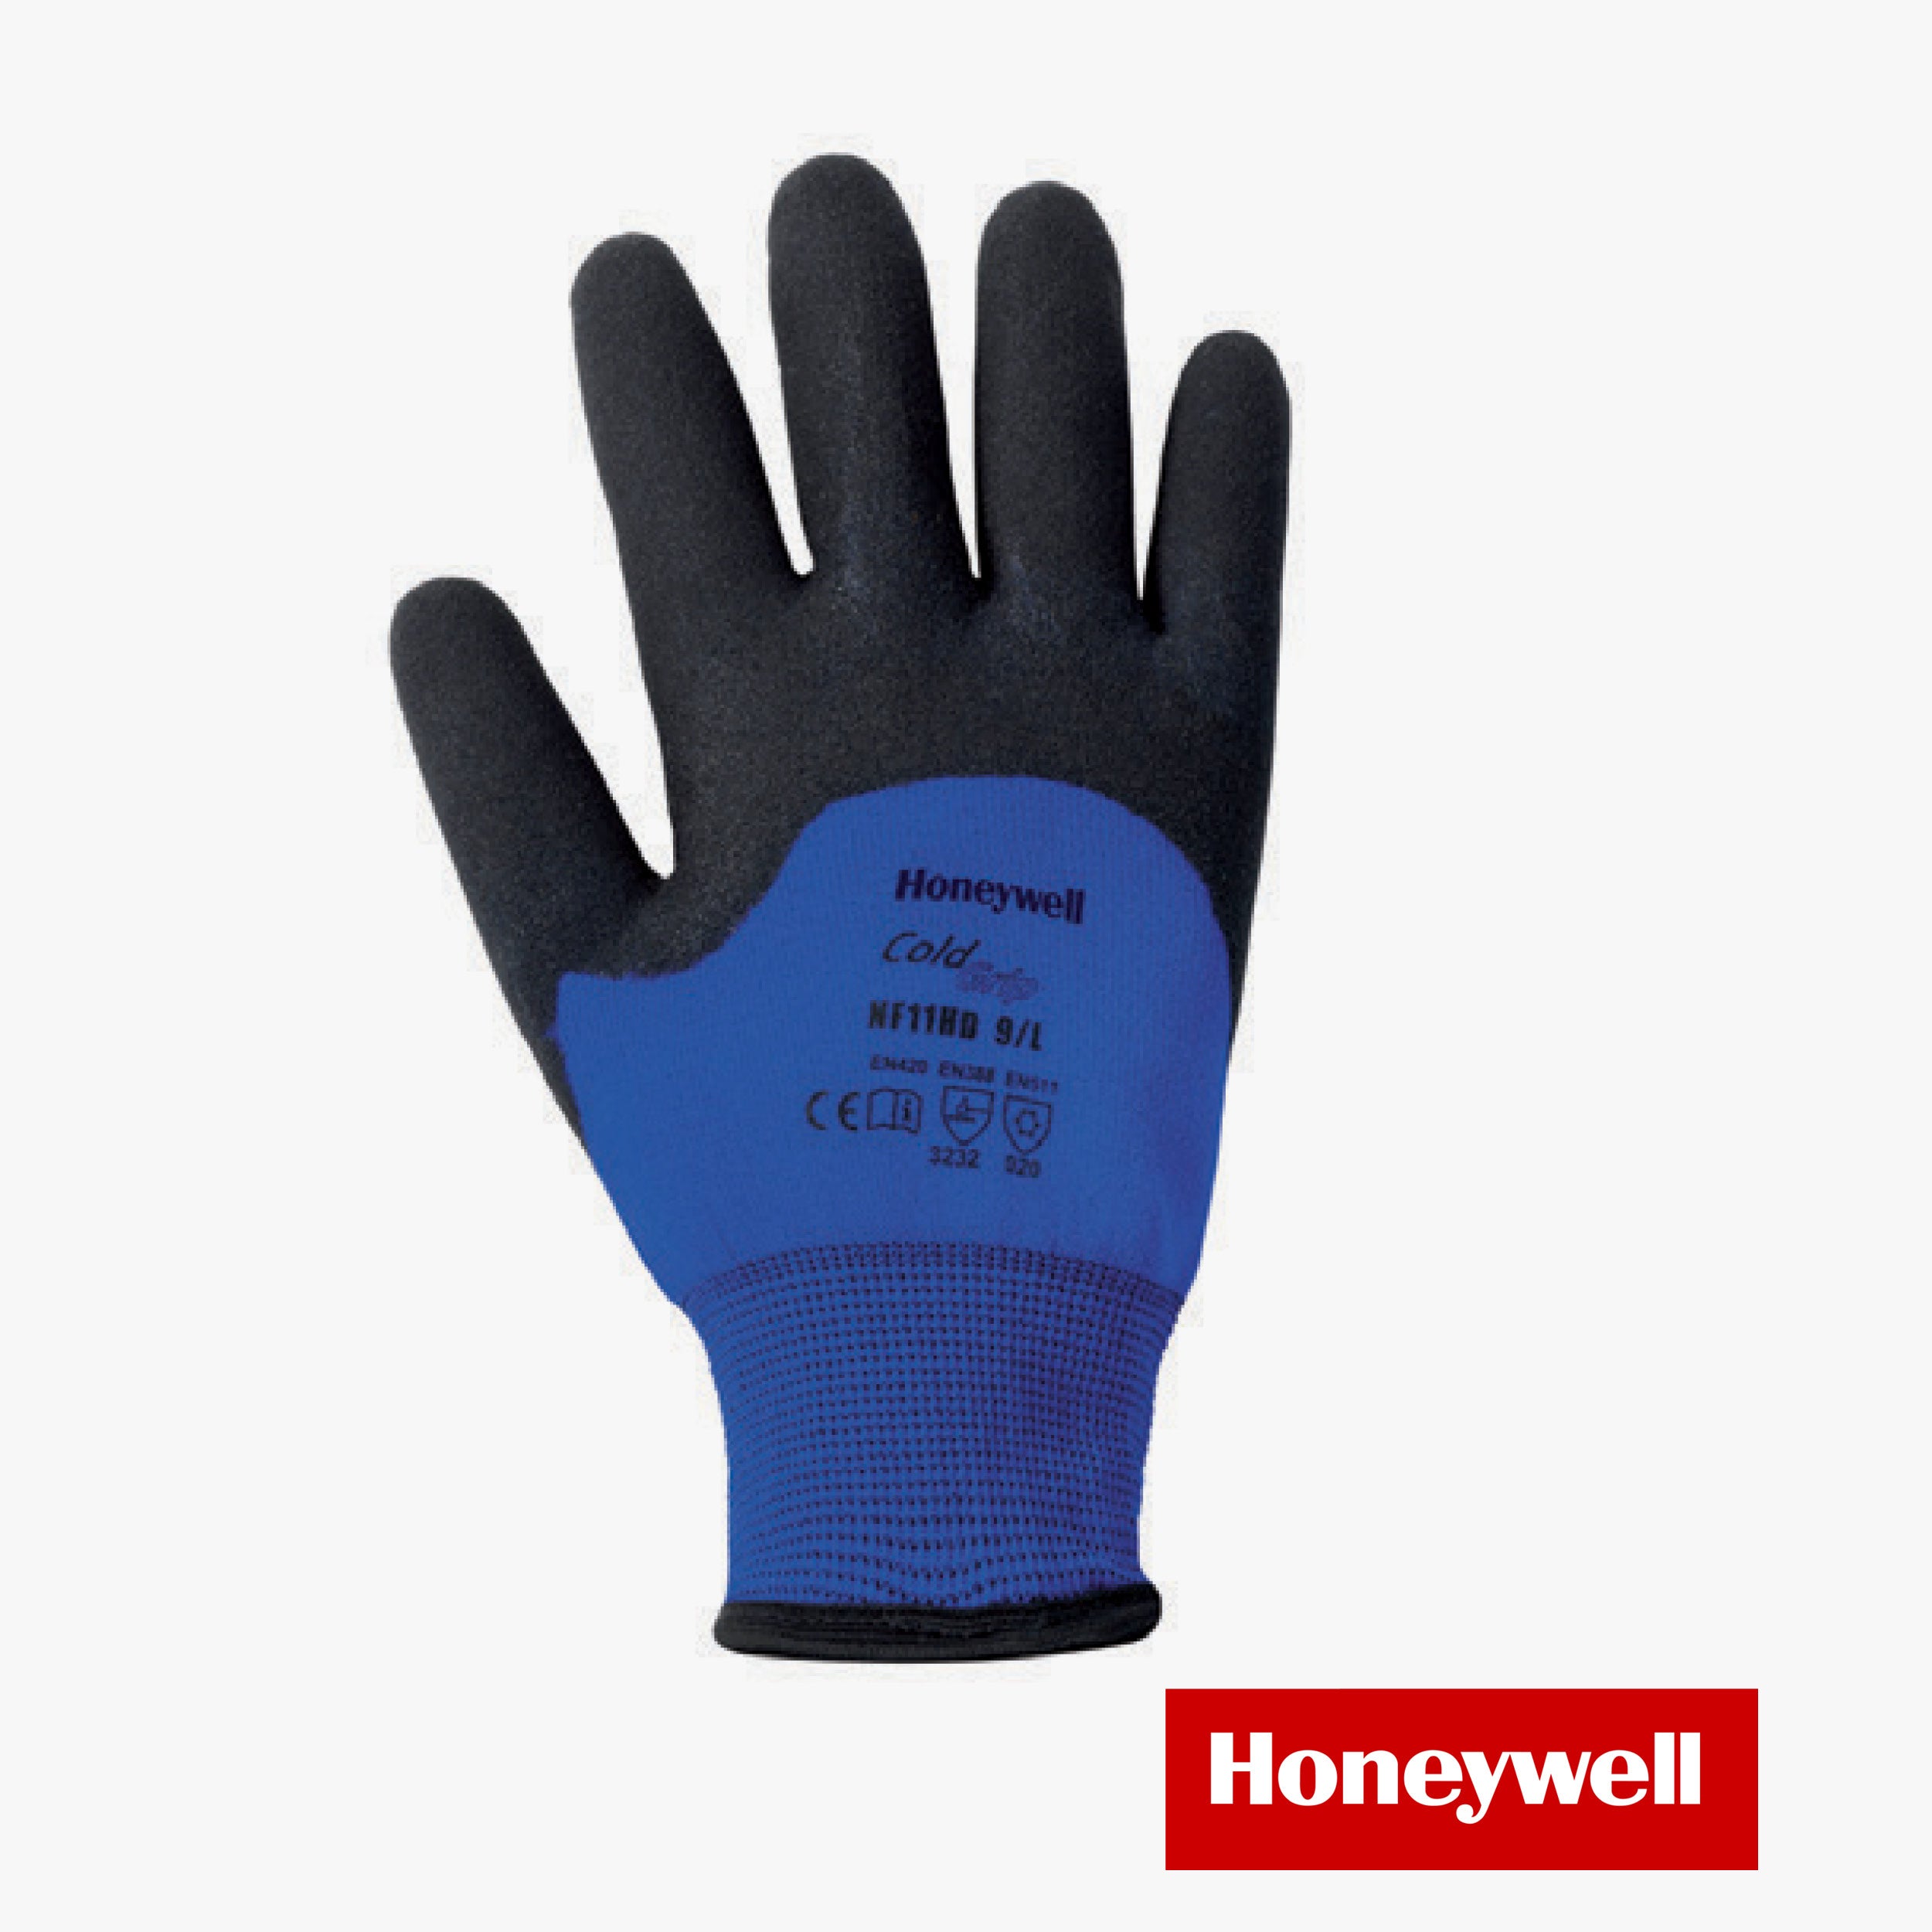 Cold grip pvc padded gloves size (10/11/9)